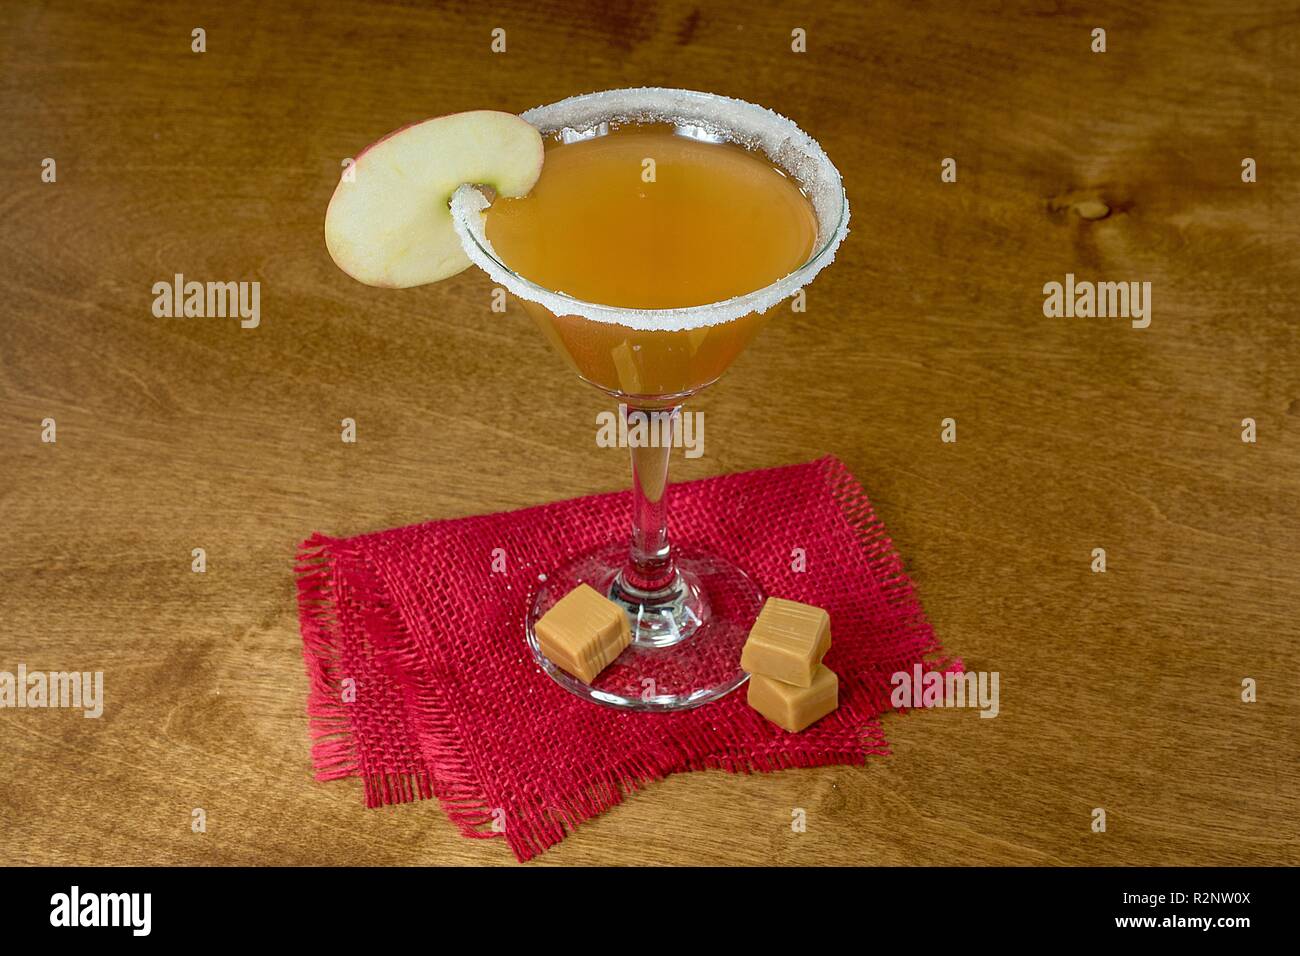 apple slice garnish on sugar rim martini cocktail glass with caramel candy and red burlap Stock Photo